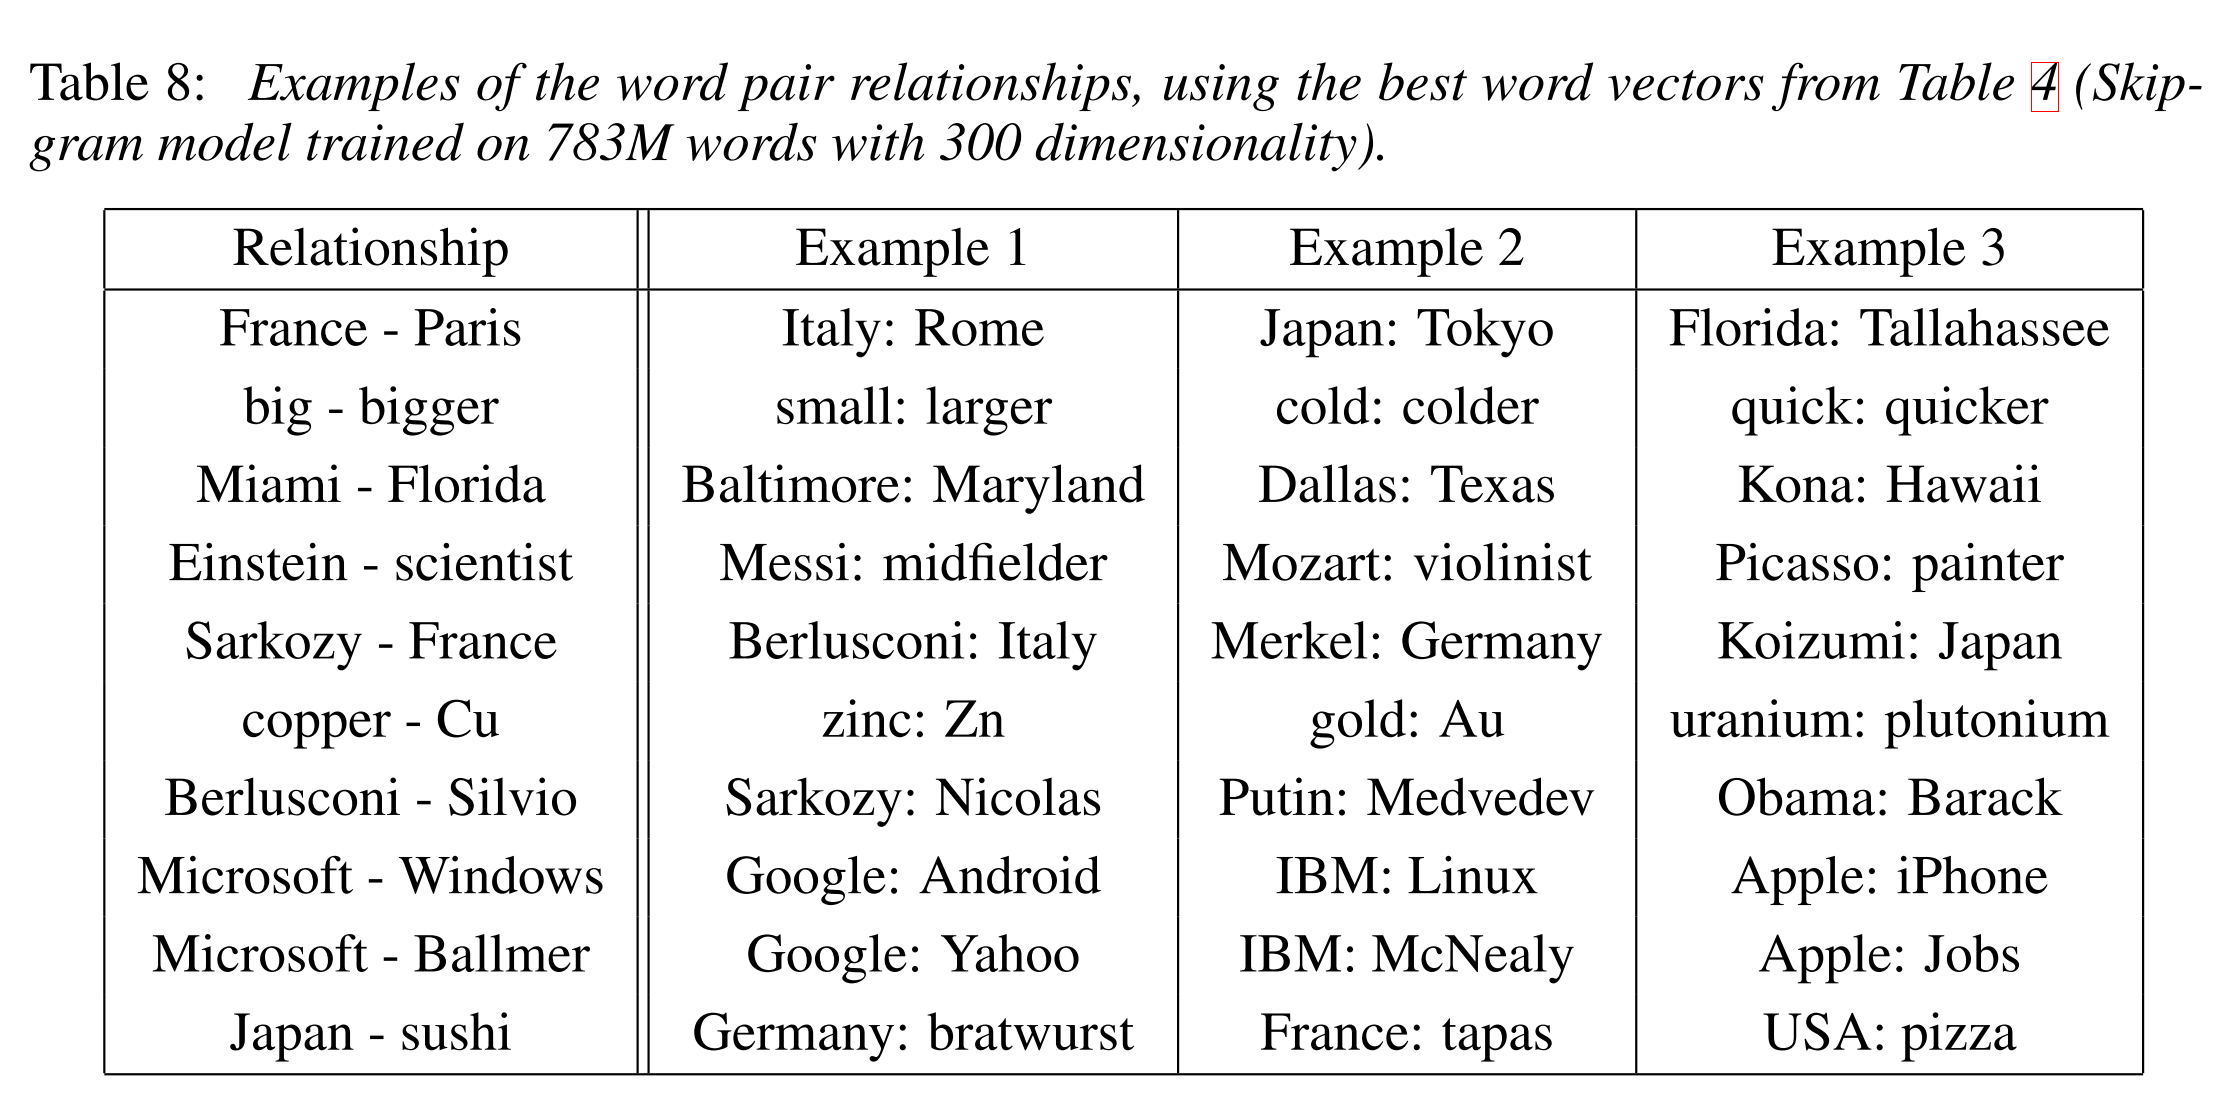 word2vec-ee-table-8.png?w=1132